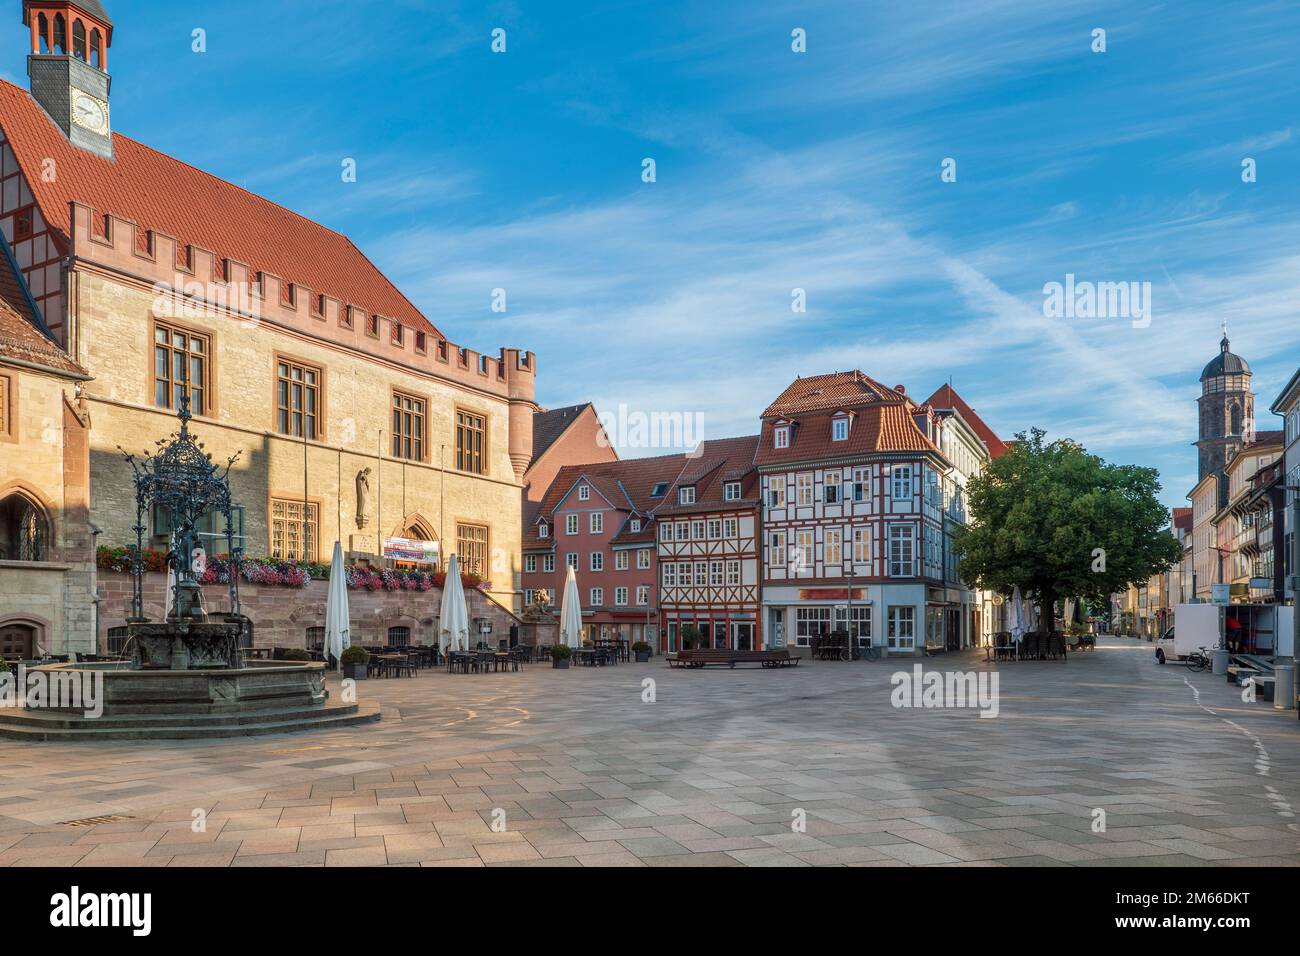 Old town hall in Goettingen with Gaenseliesel fountain, Germany Stock Photo